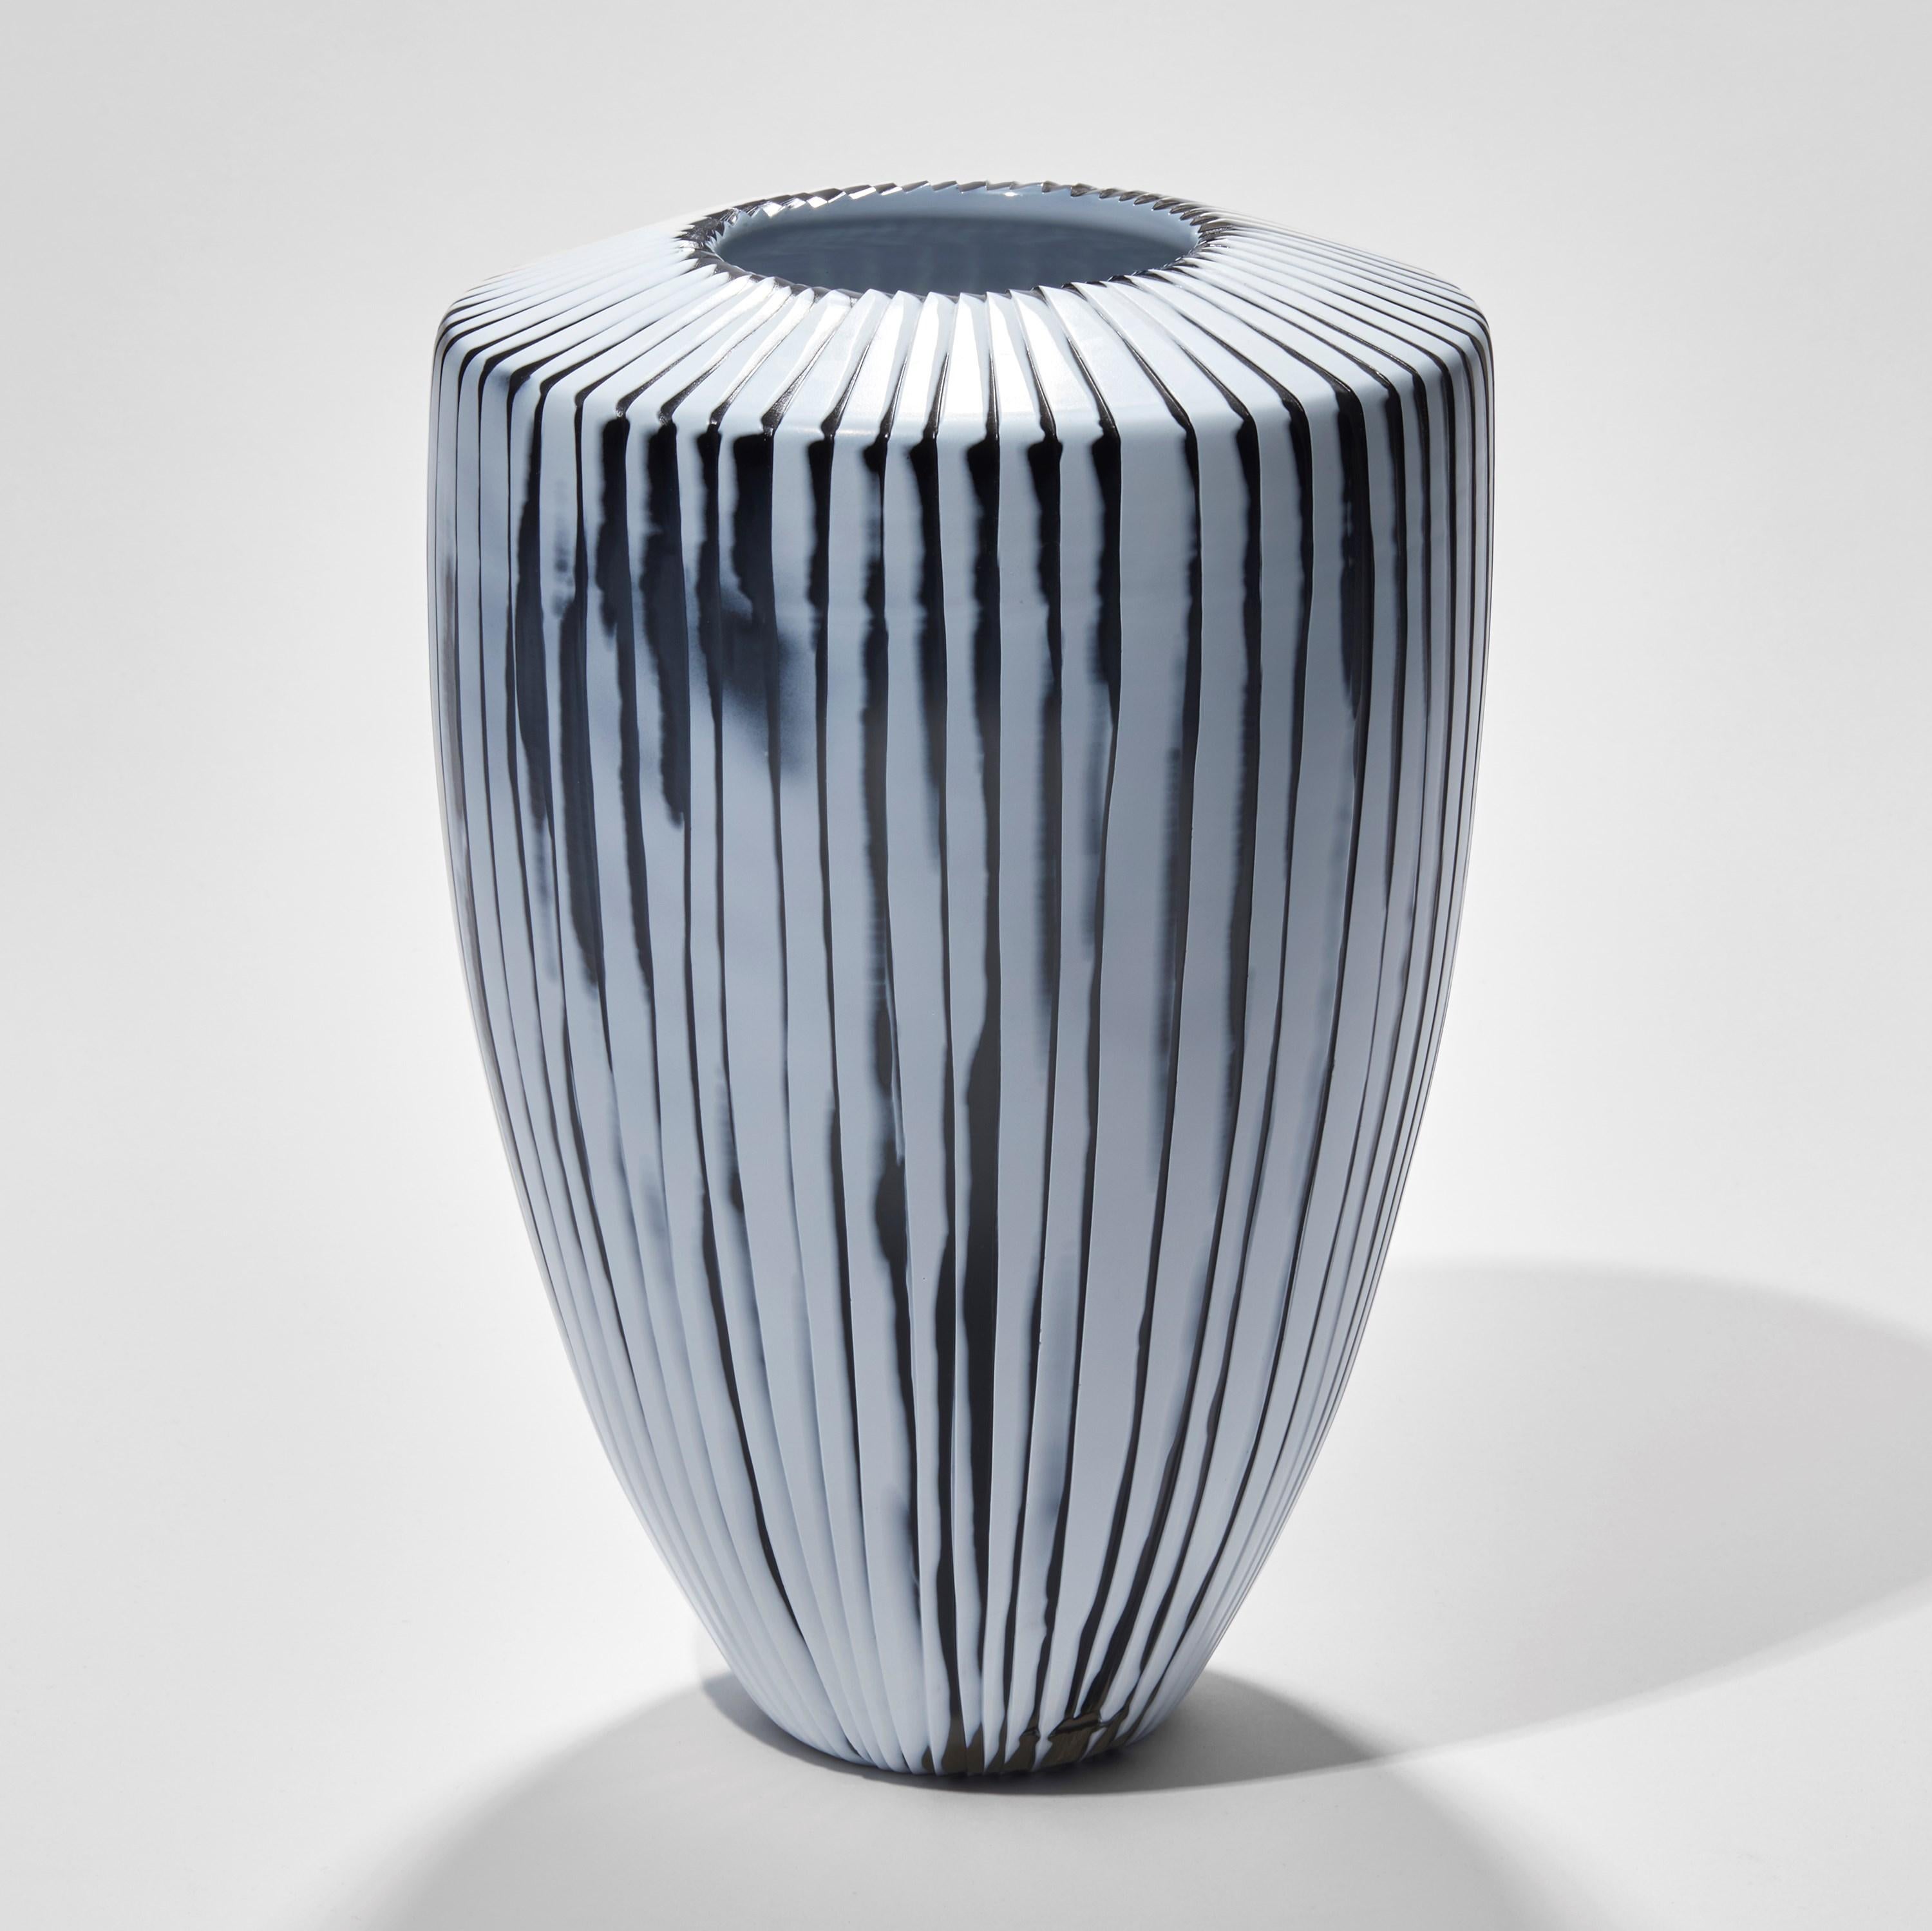 Shell II is a unique white and slate grey handblown and cut glass vase by the British artist Laura Birdsall. A beautifully crafted artwork, after blowing the piece and layering the two colours, it has been cut to create fine ridges, also revealing